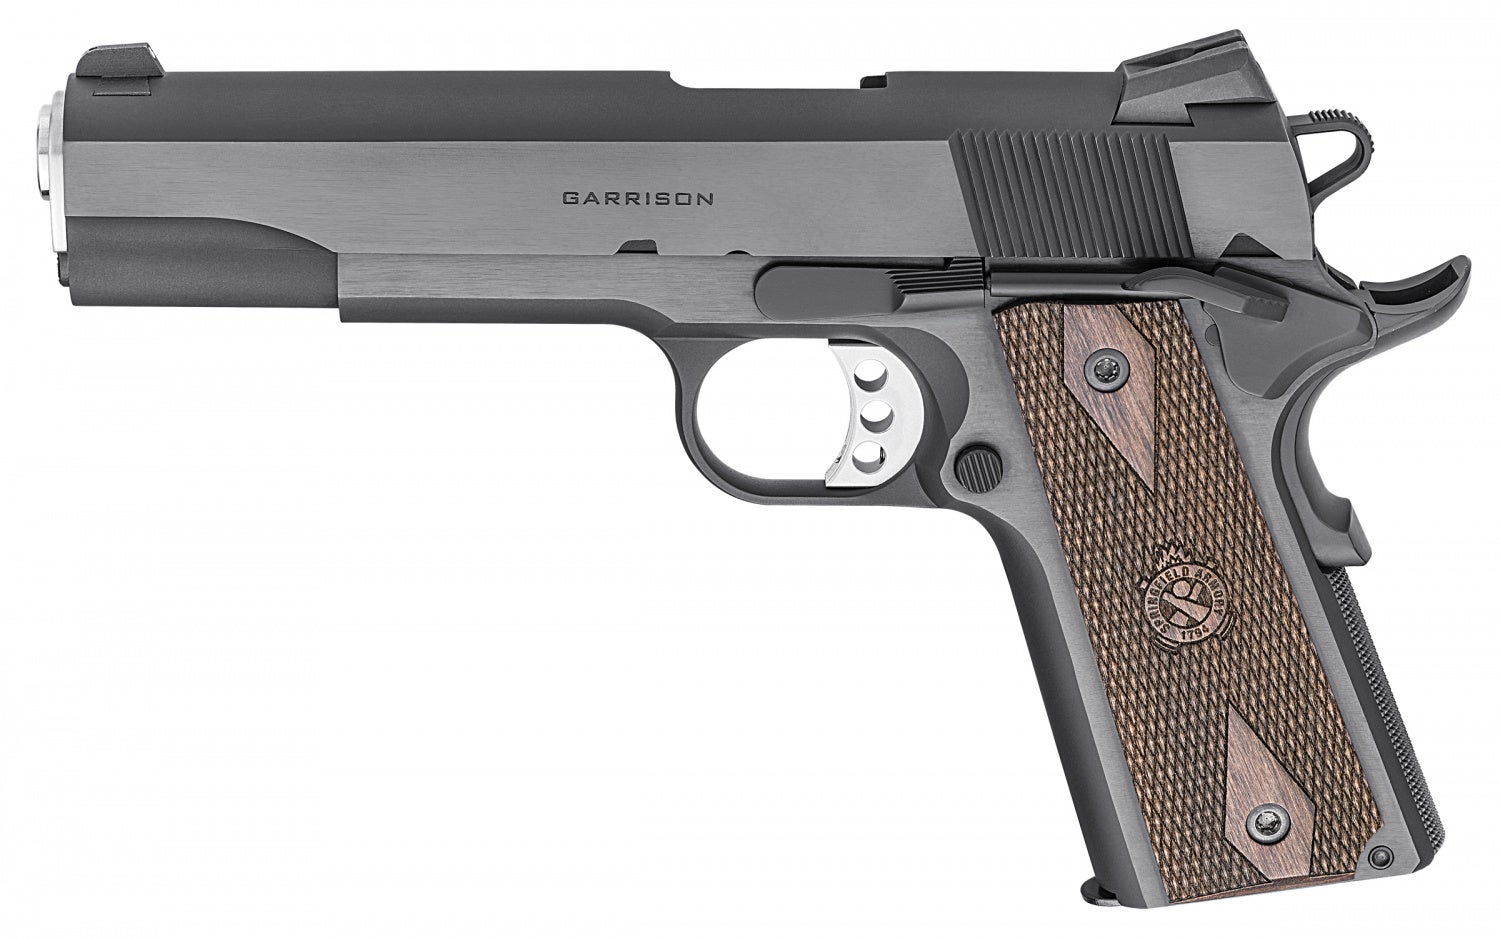 The New 9mm Garrison 1911 from Springfield Armory